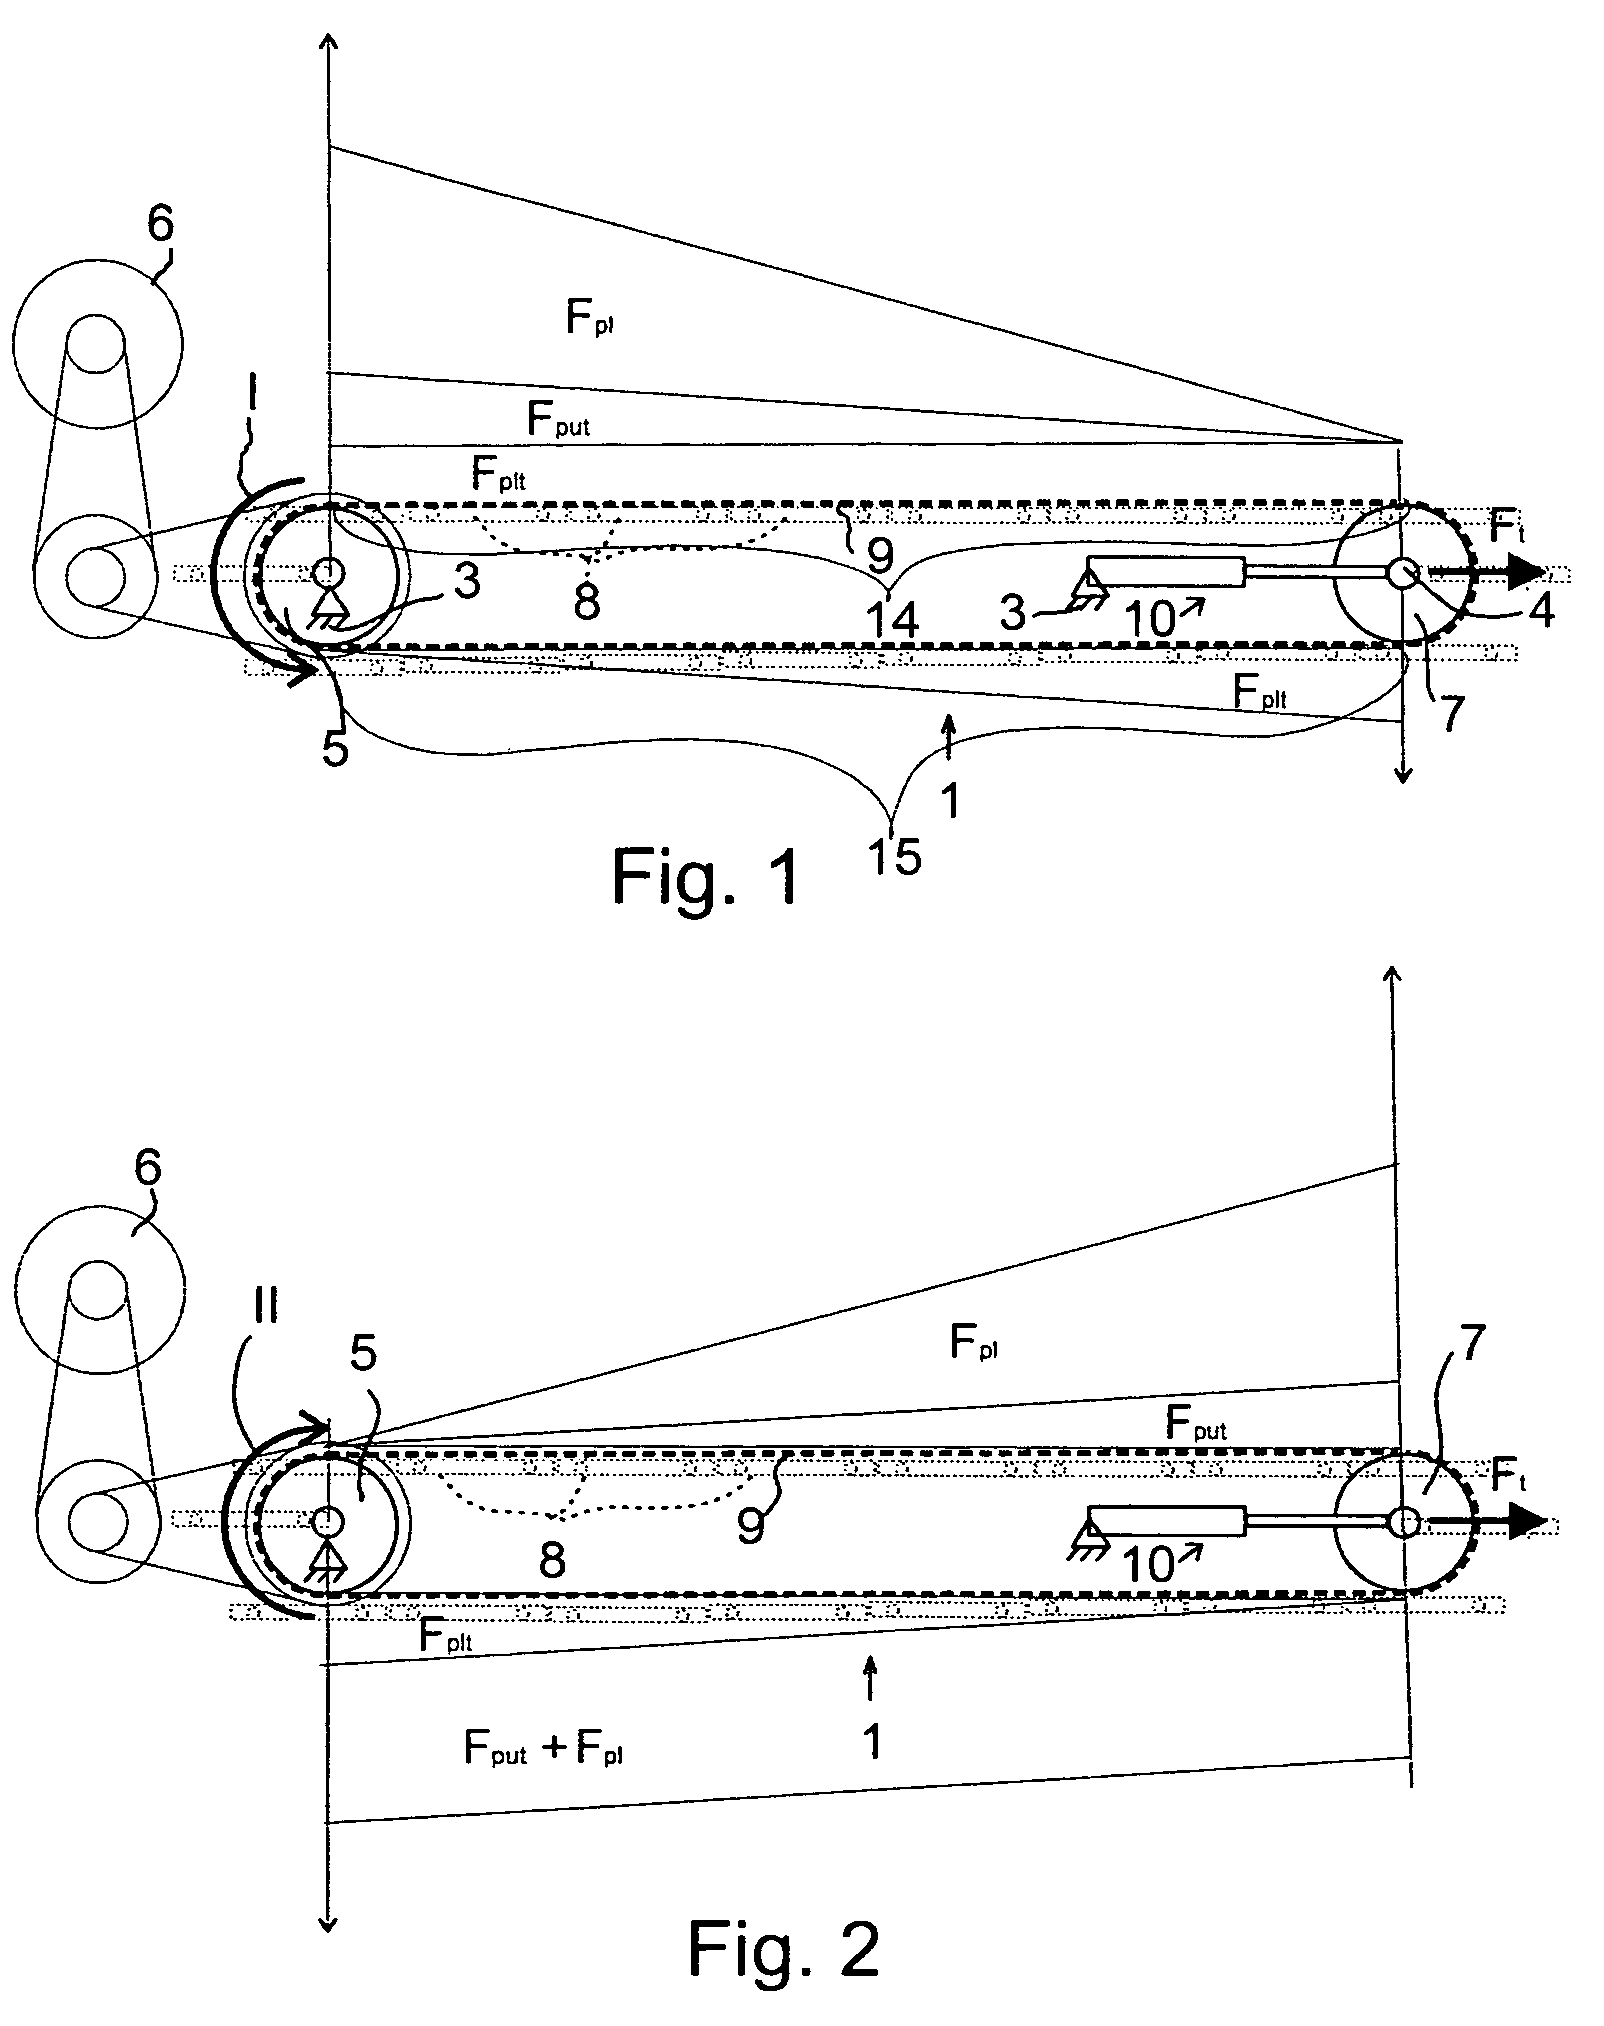 Travelator and method for controlling the operation of a travelator